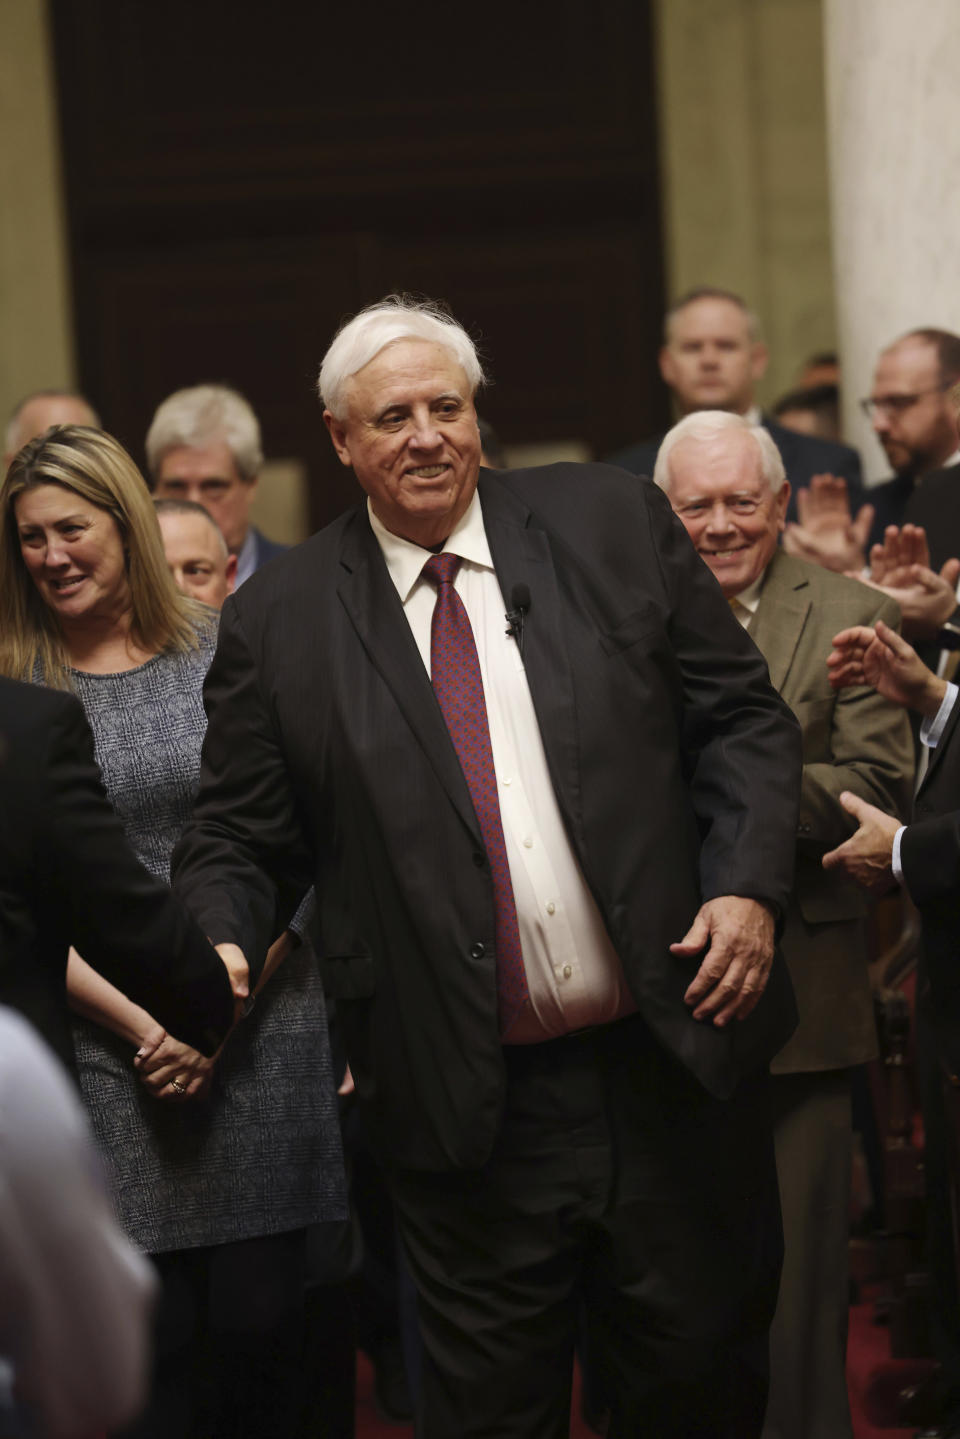 West Virginia Gov. Jim Justice enters the House Chamber prior to giving his annual State of the State address in the House Chambers at the state capitol in Charleston, W.Va., on Wednesday, Jan. 11, 2023. (AP Photo/Chris Jackson)